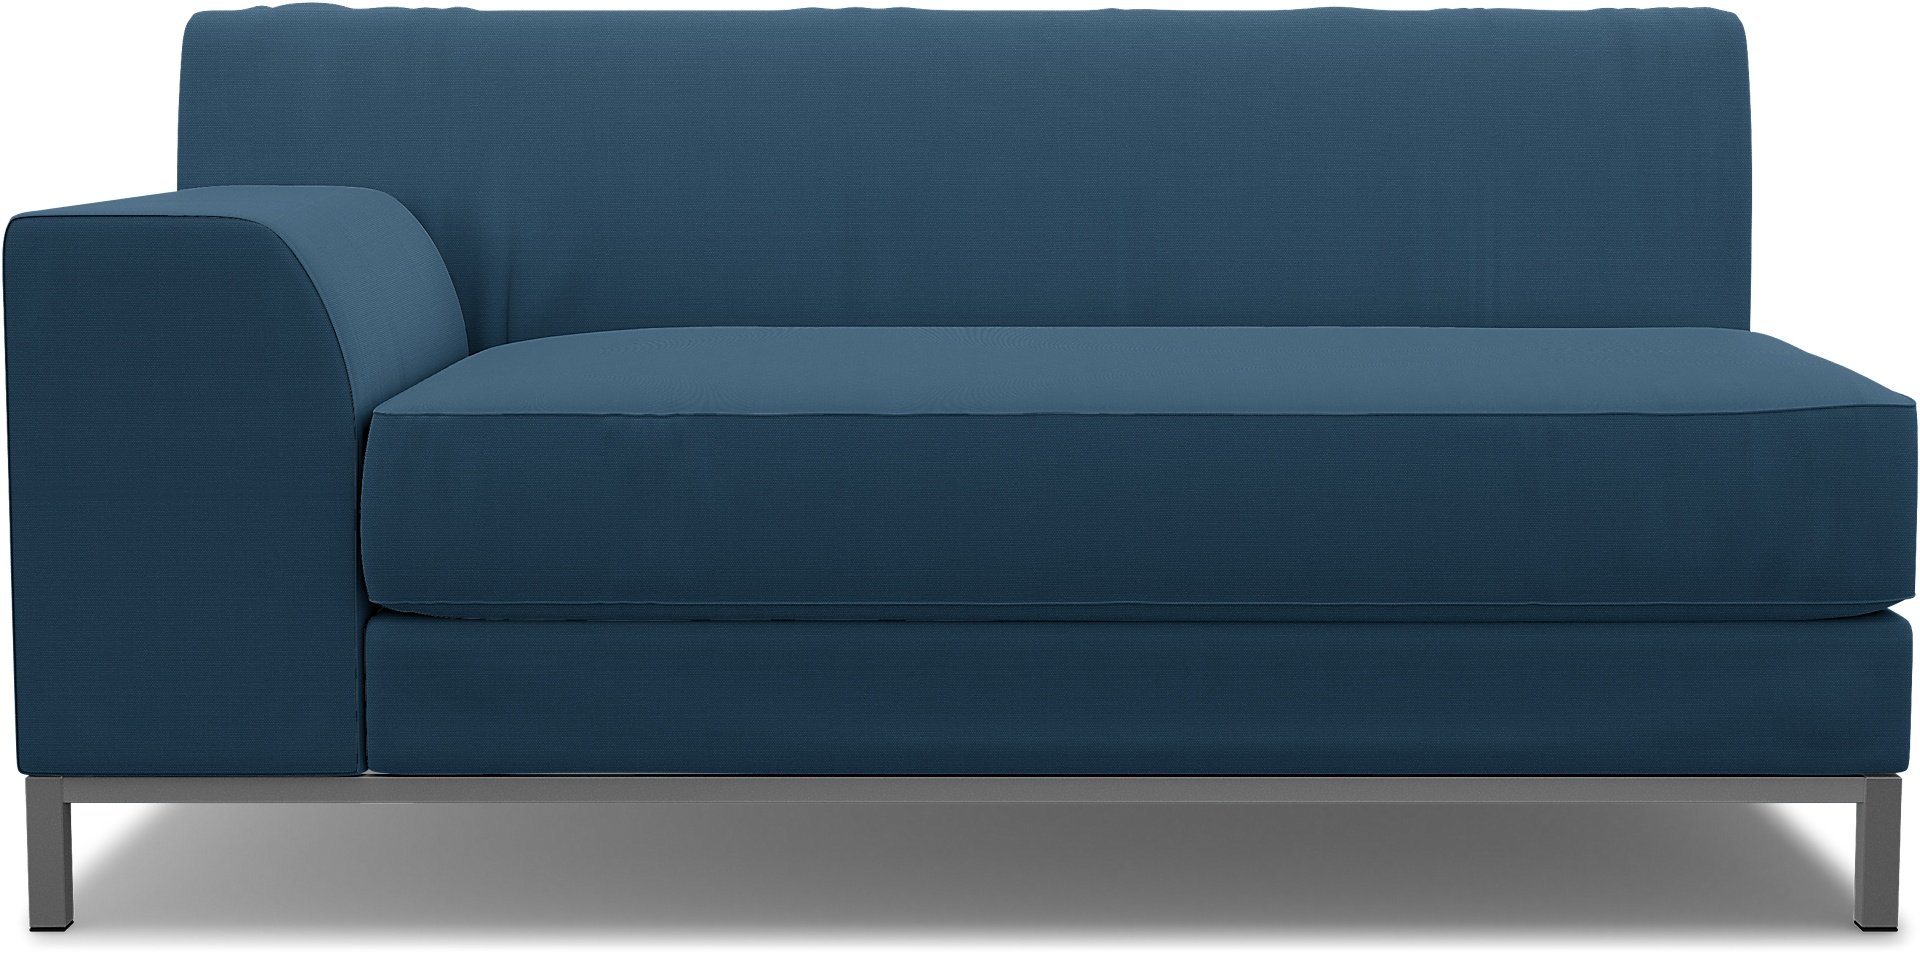 IKEA - Kramfors 2 Seater Sofa with Left Arm Cover, Real Teal, Cotton - Bemz